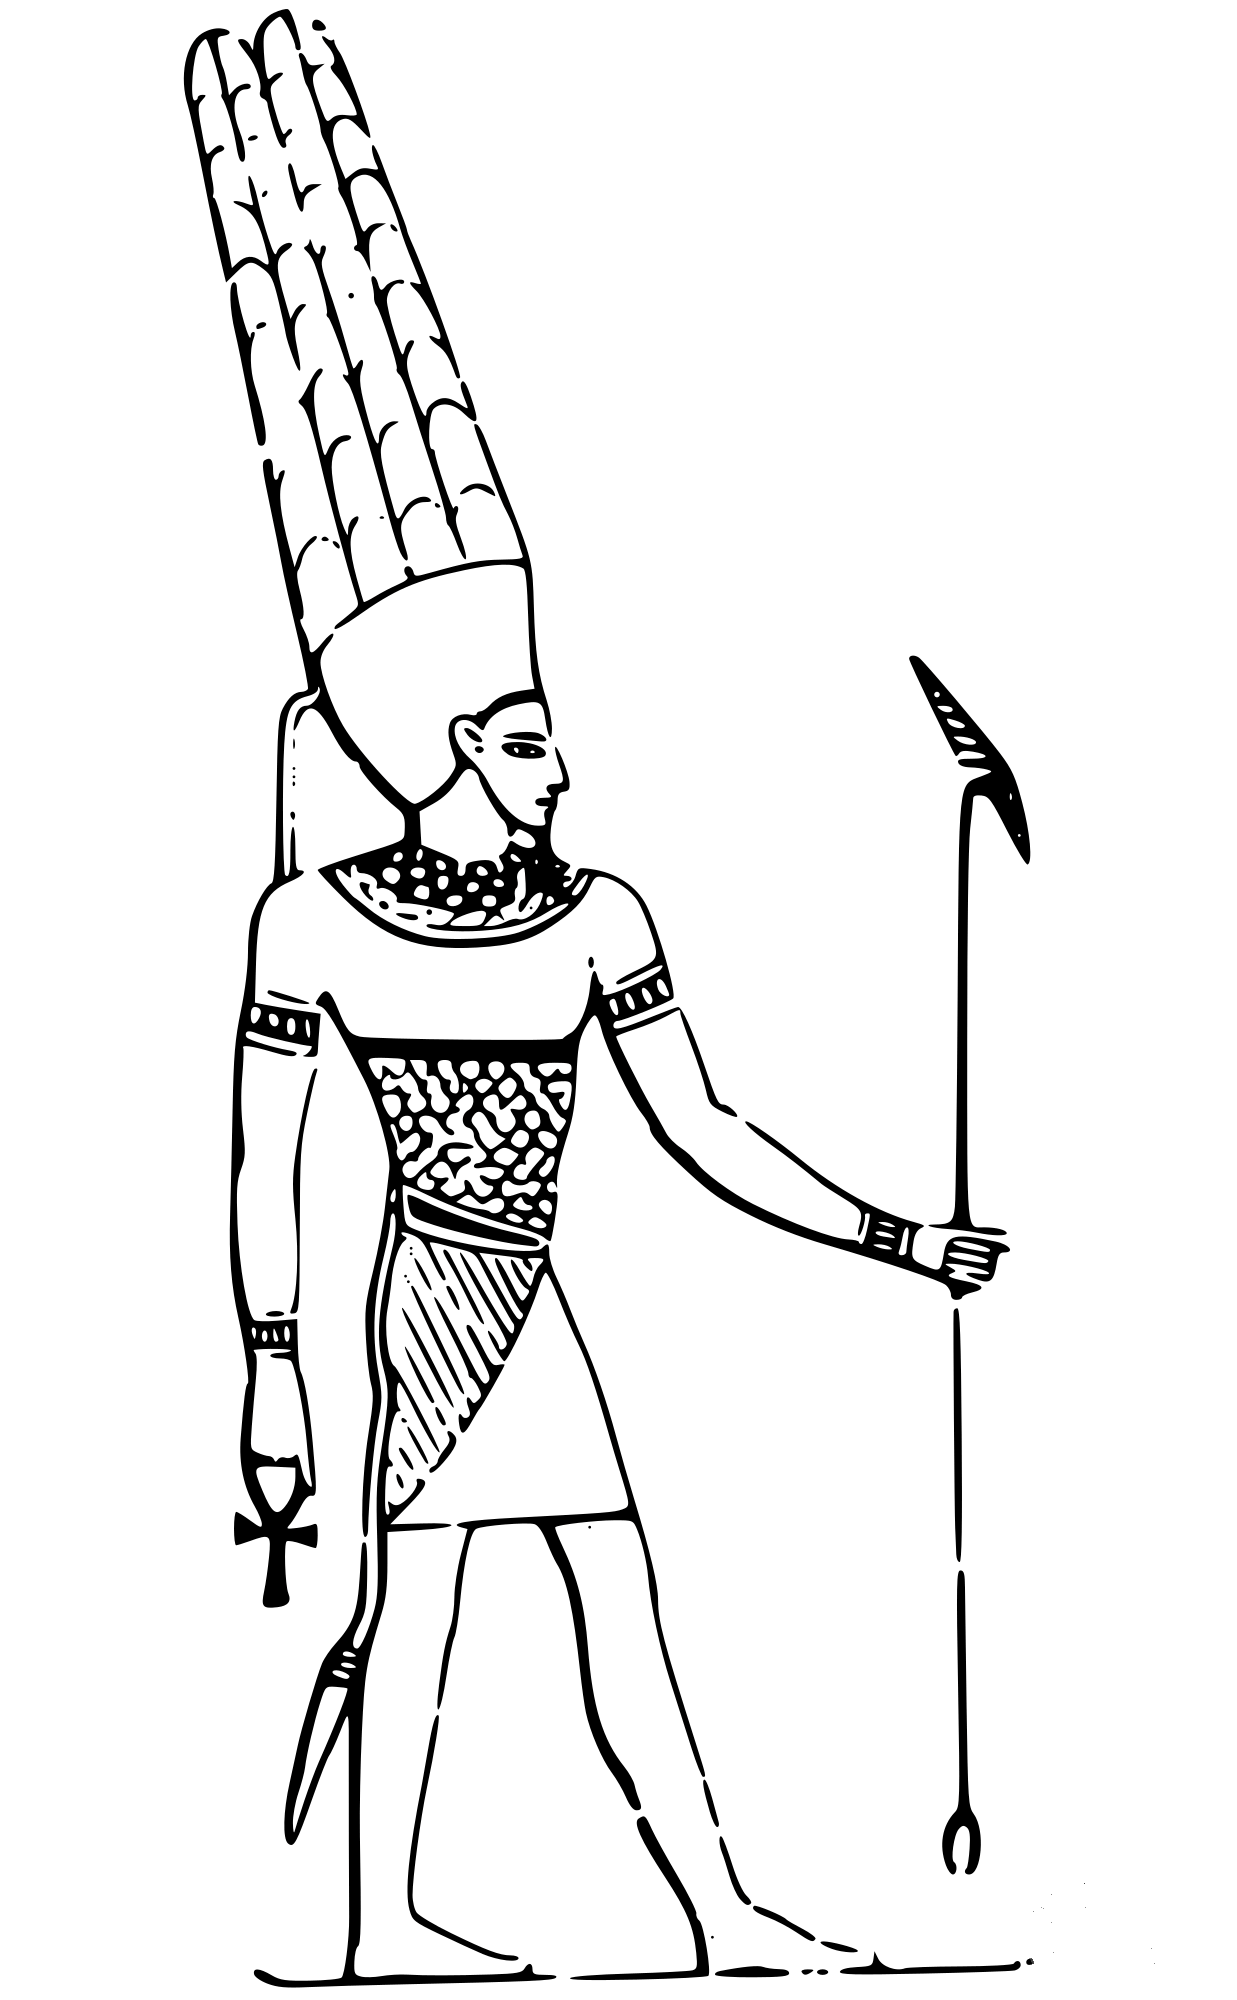 Egyptian God Chonsu coloring page - ColouringPages